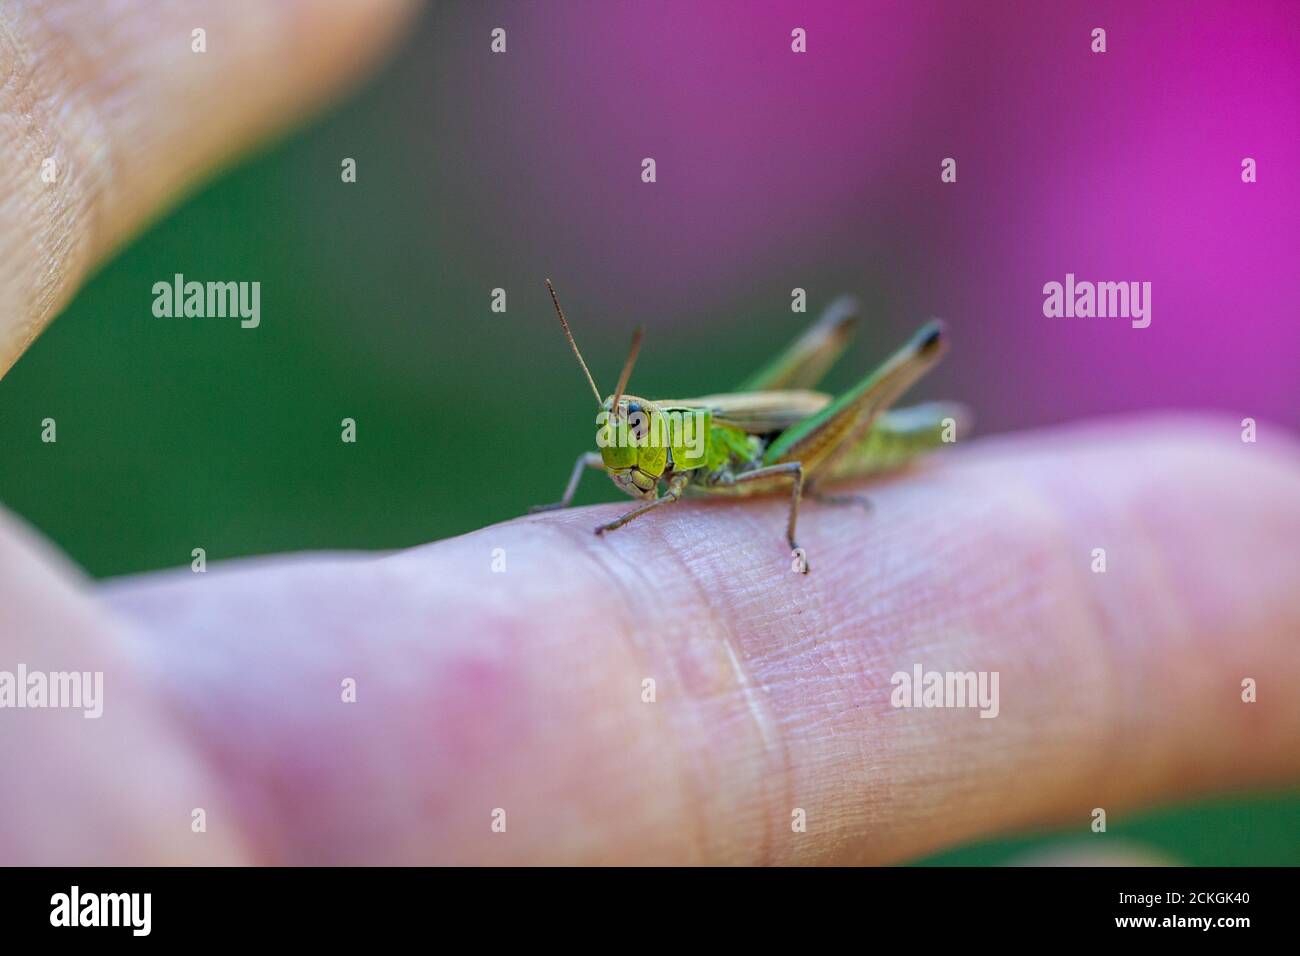 Closeup of a grasshopper on a finger with a beautiful blur background Stock Photo